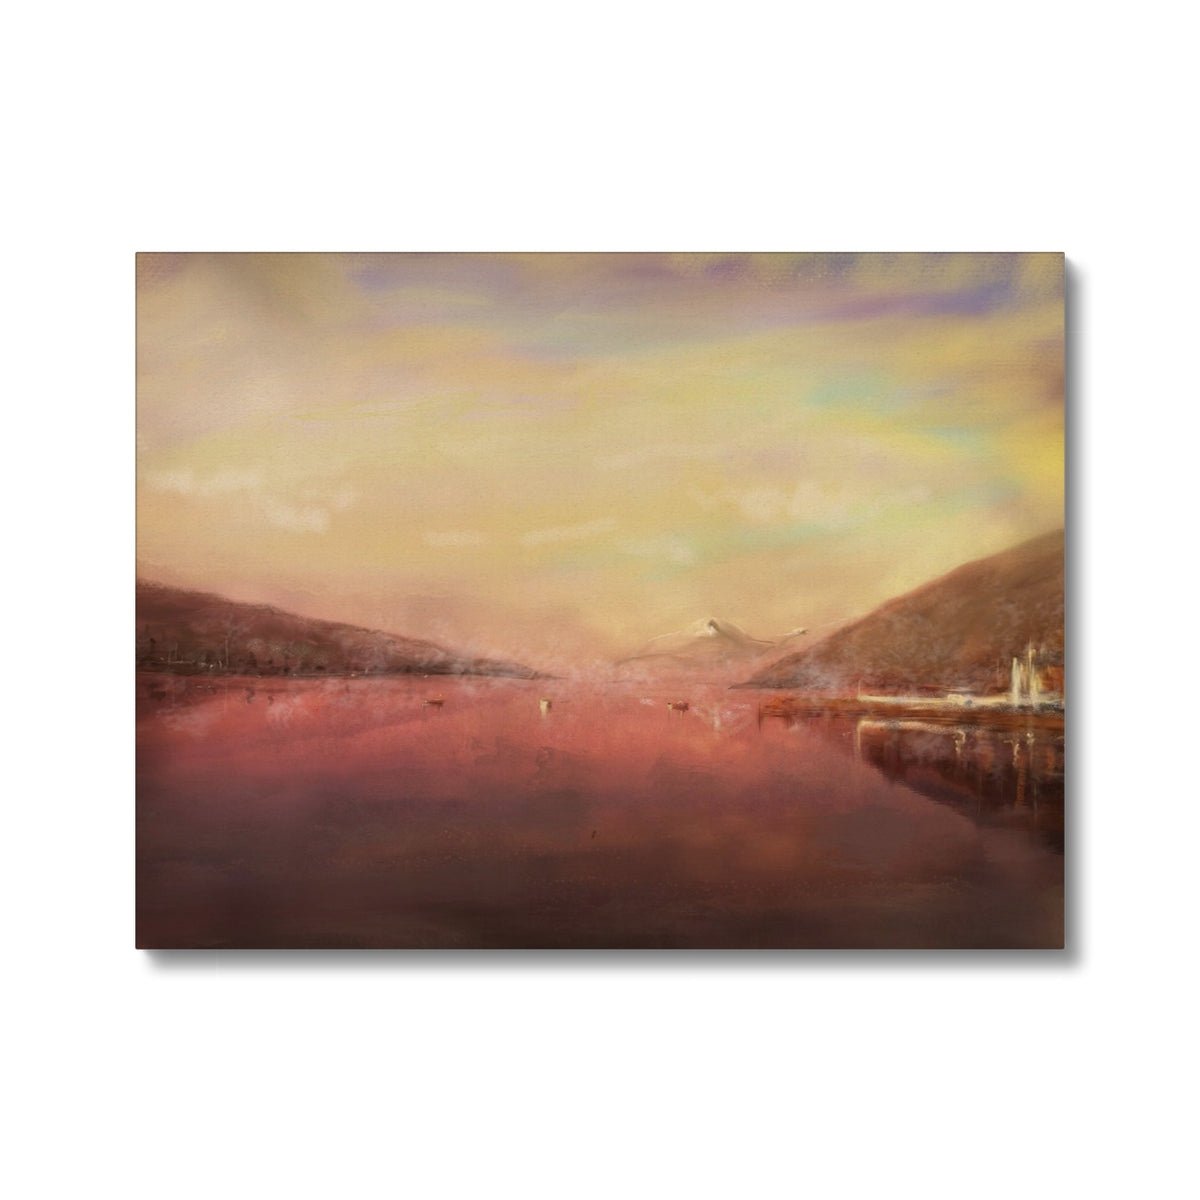 Loch Tay Painting | Canvas From Scotland-Contemporary Stretched Canvas Prints-Scottish Lochs & Mountains Art Gallery-24"x18"-Paintings, Prints, Homeware, Art Gifts From Scotland By Scottish Artist Kevin Hunter